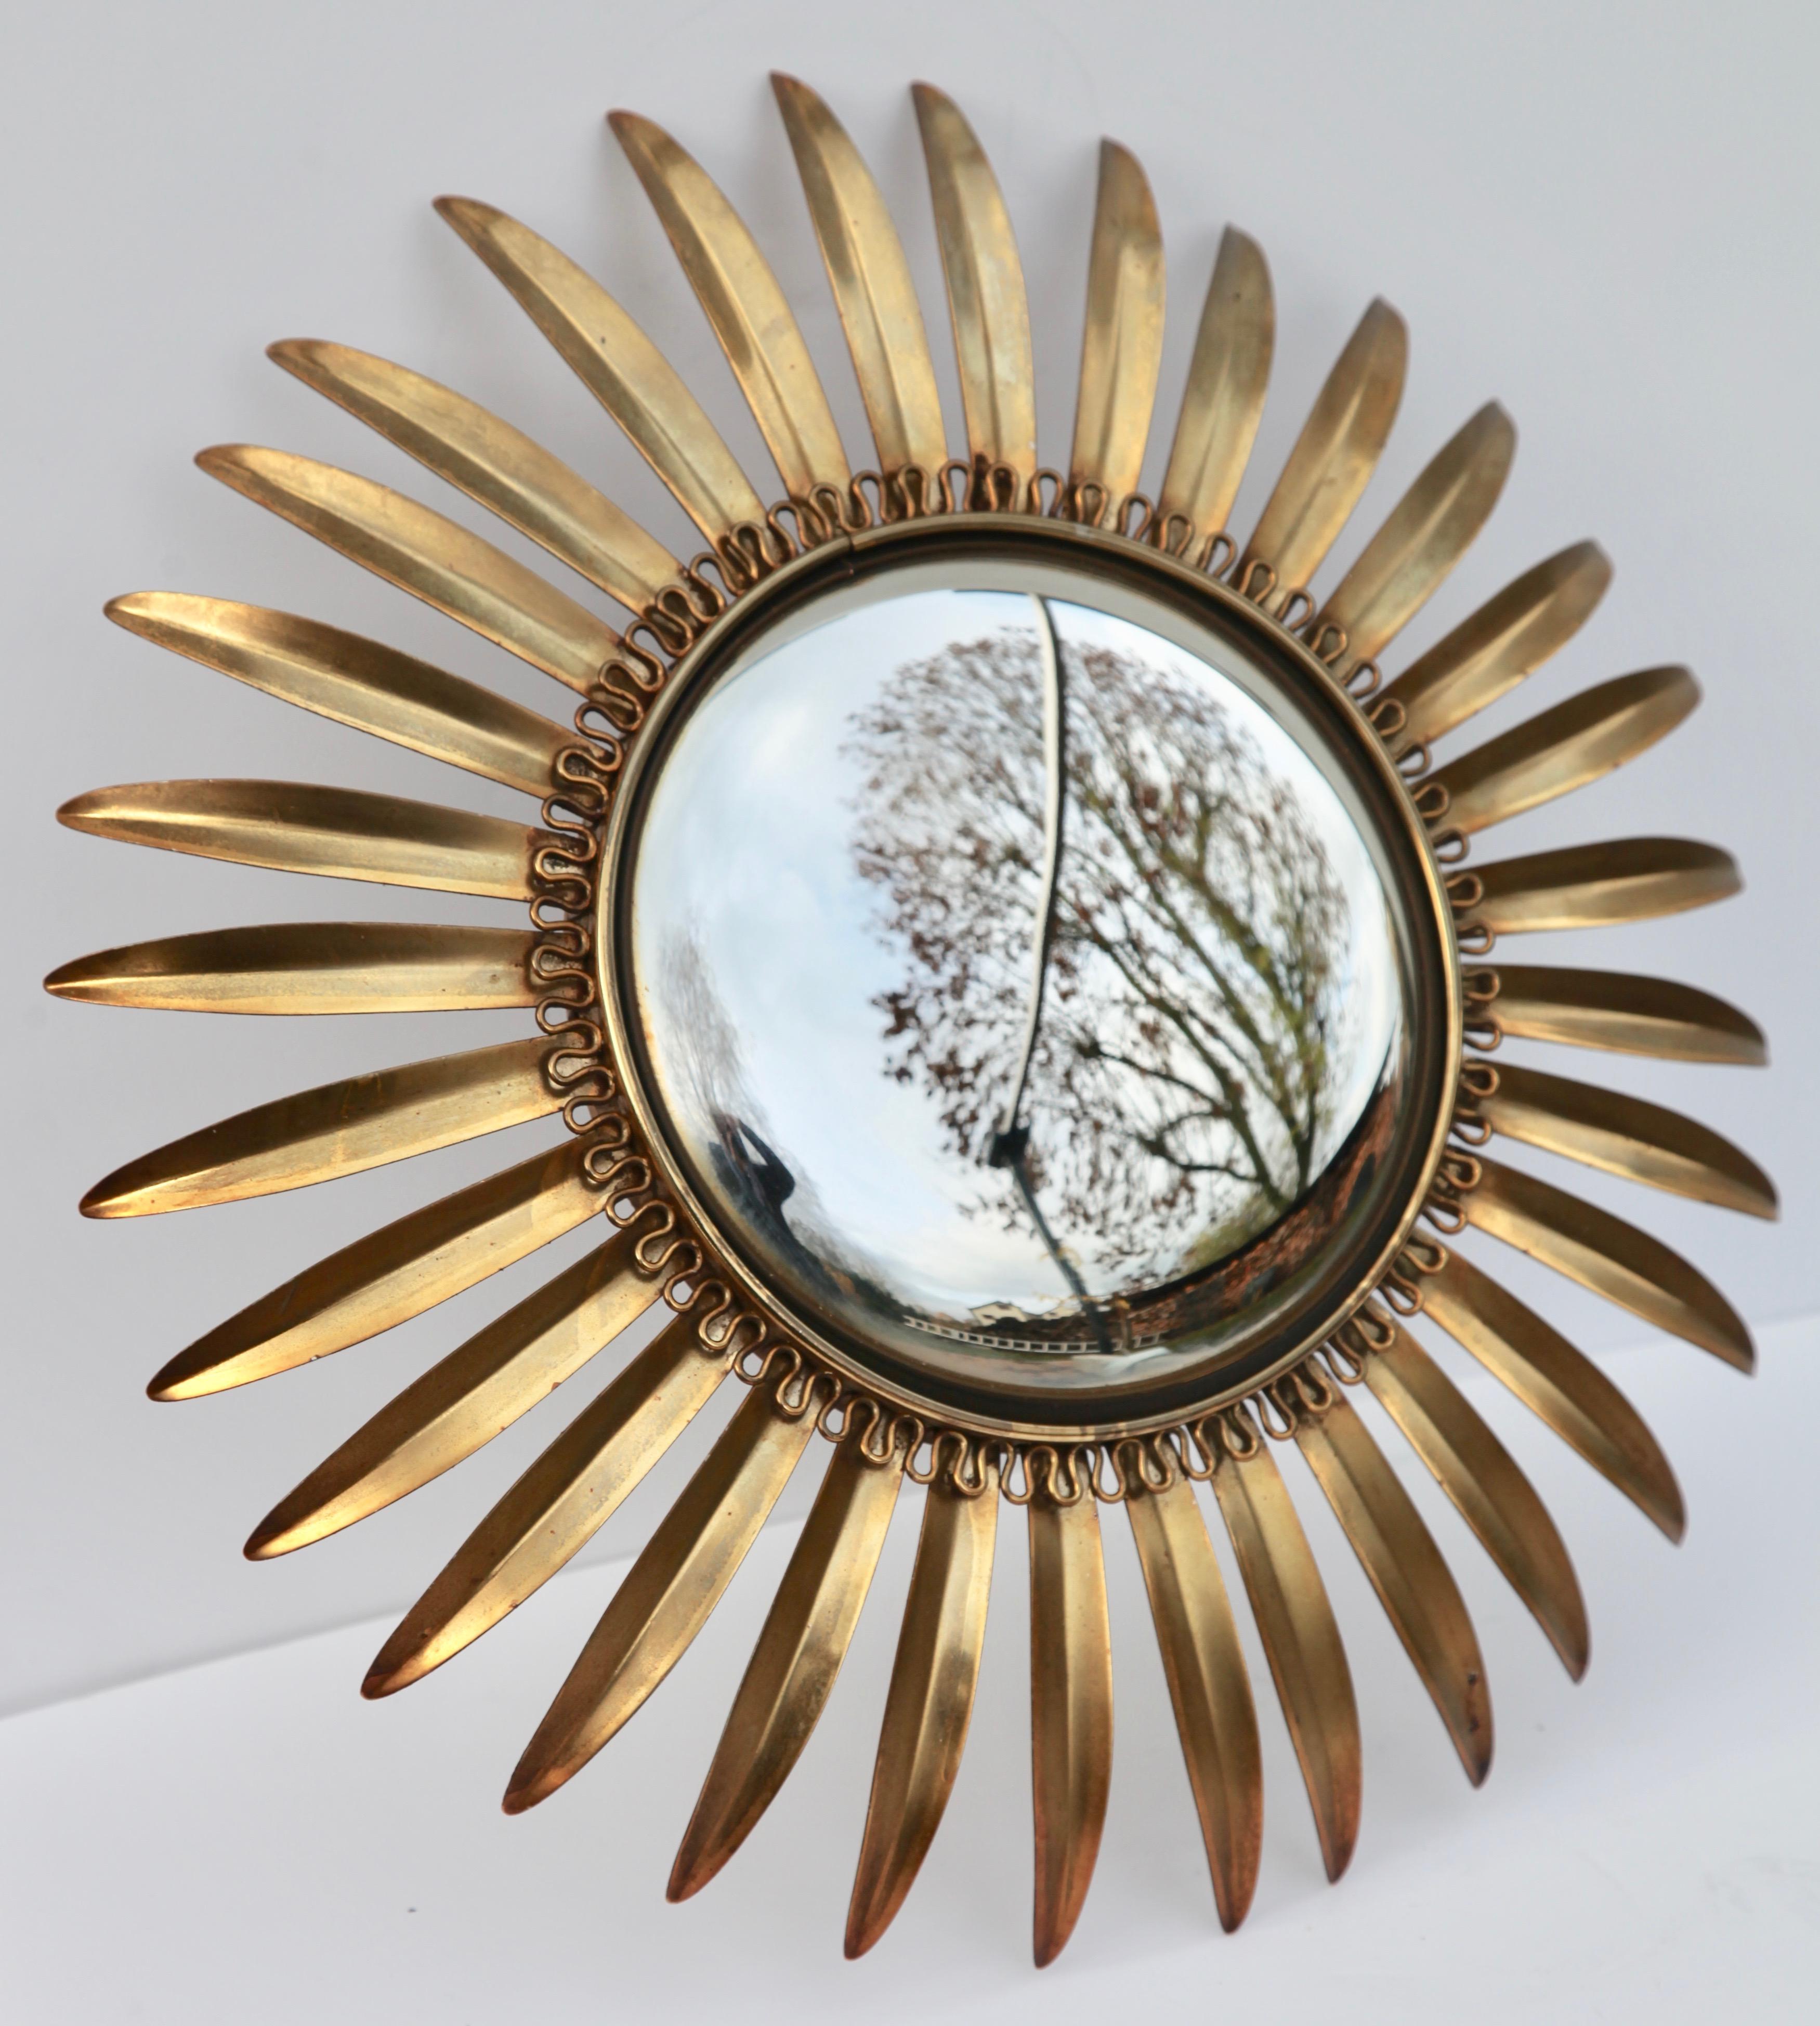 Sunburst mirror with convex mirror made by factory Deknudtin, Belgium
This lovely mirror has a beautiful aged patina according to its age and it is
an interesting piece to create a wall decoration
Made from solid brass.
It was made in the mirror